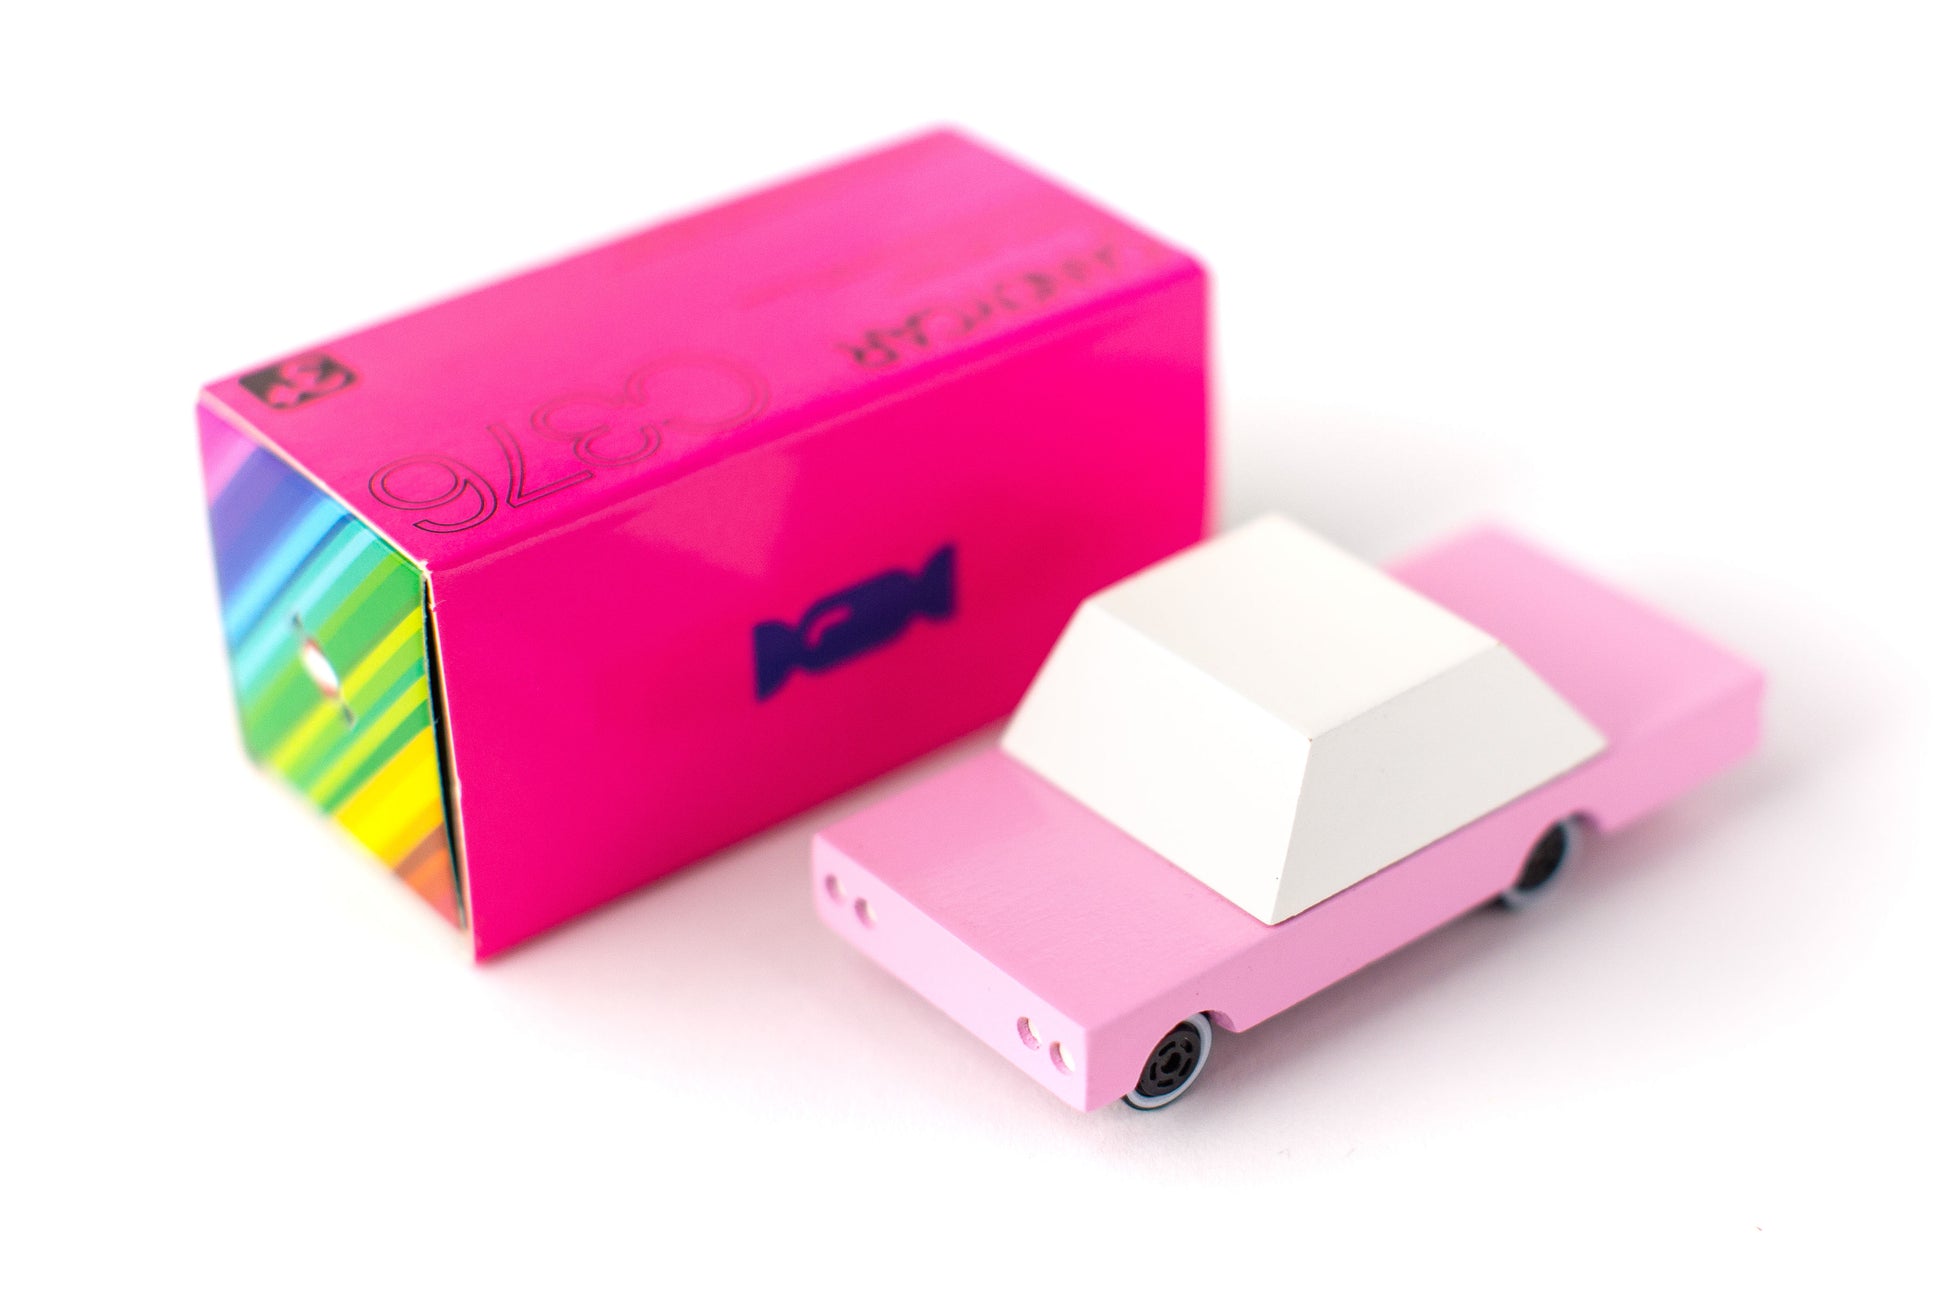 A candycar Pink toy from the Pencil Me In stationery shop